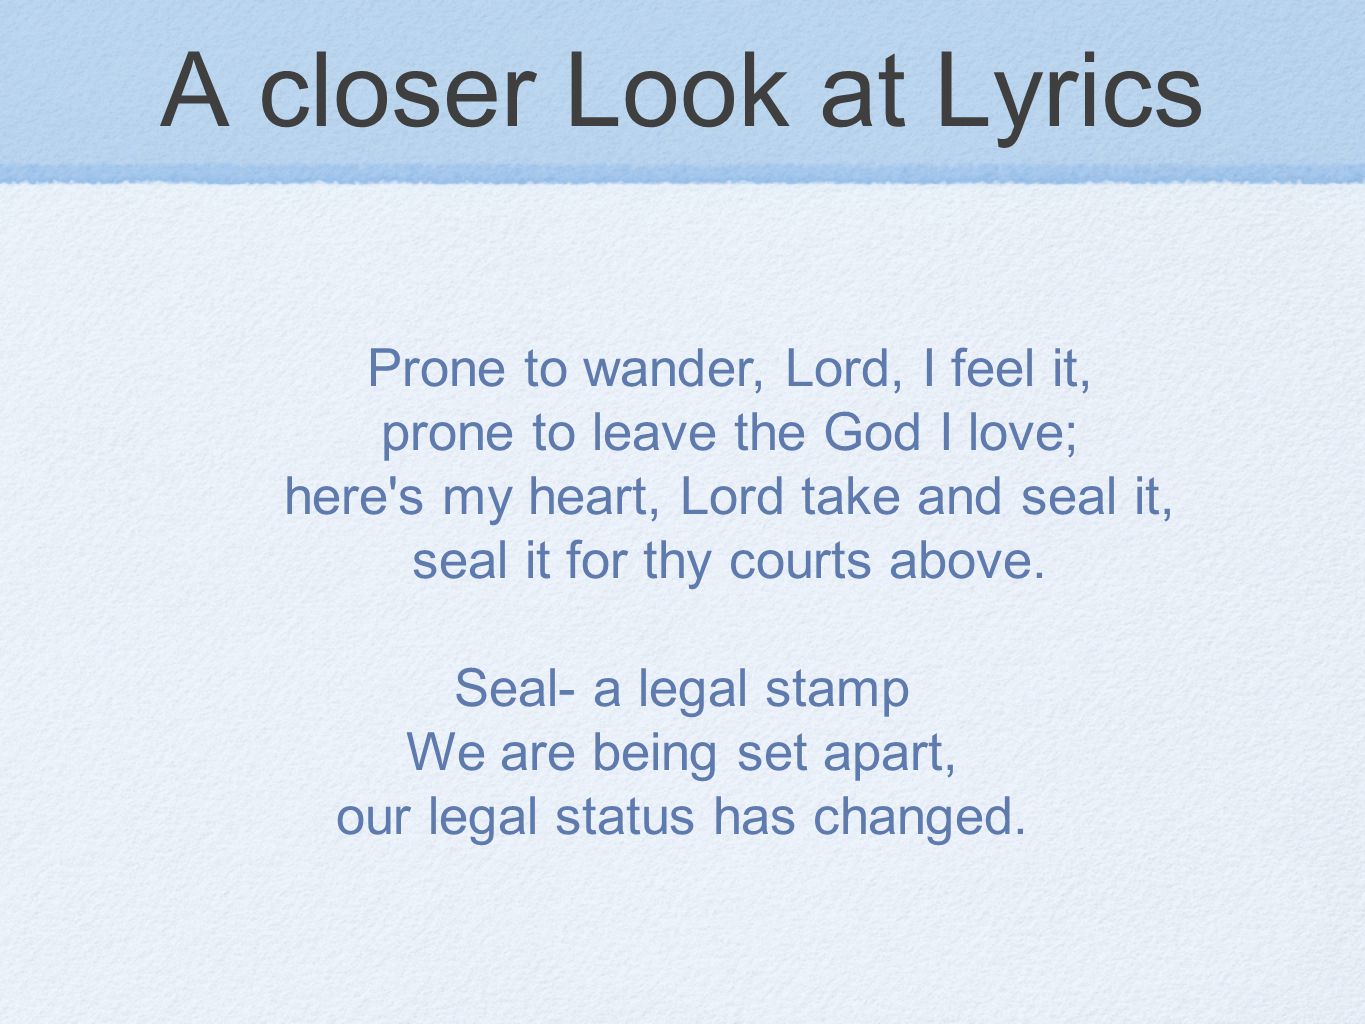 A closer Look at Lyrics Prone to wander, Lord, I feel it, prone to leave the God I love; here s my heart, Lord take and seal it, seal it for thy courts above.